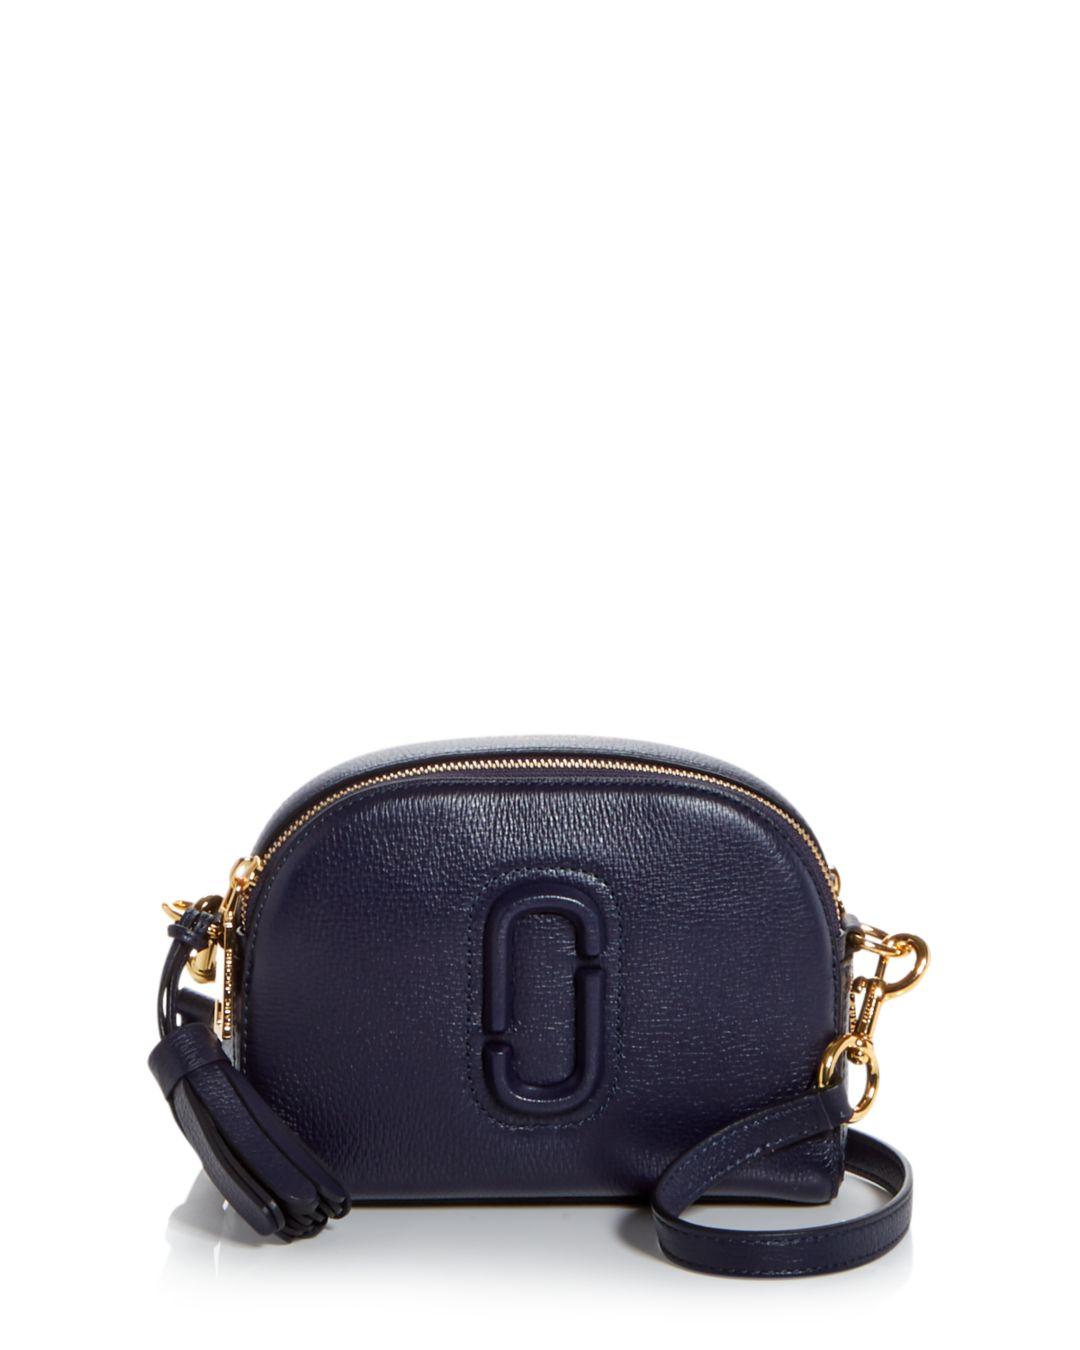 Marc Jacobs Leather Shutter Crossbody Bag in Navy (Blue) - Save 36% - Lyst